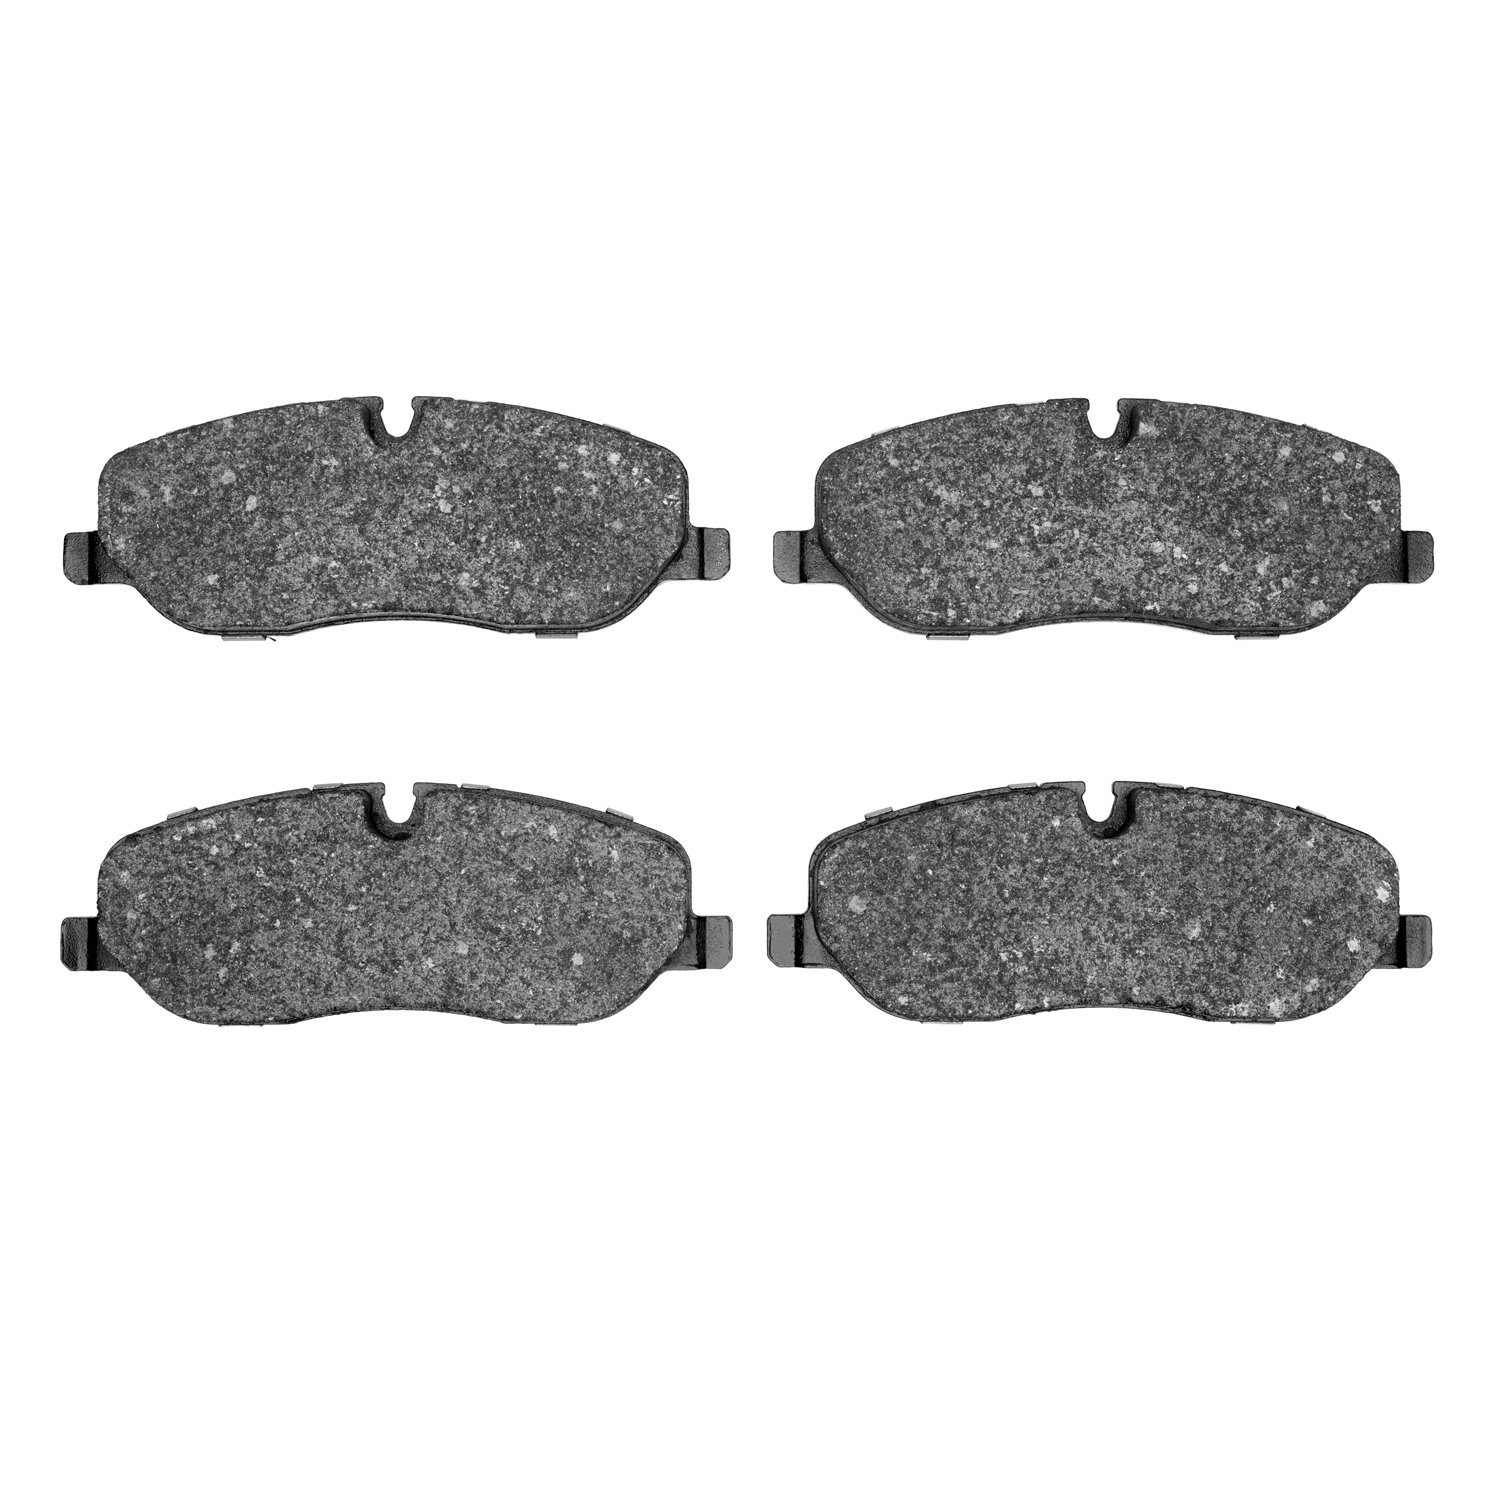 1551-1098-00 5000 Advanced Low-Metallic Brake Pads, 2005-2009 Land Rover, Position: Front